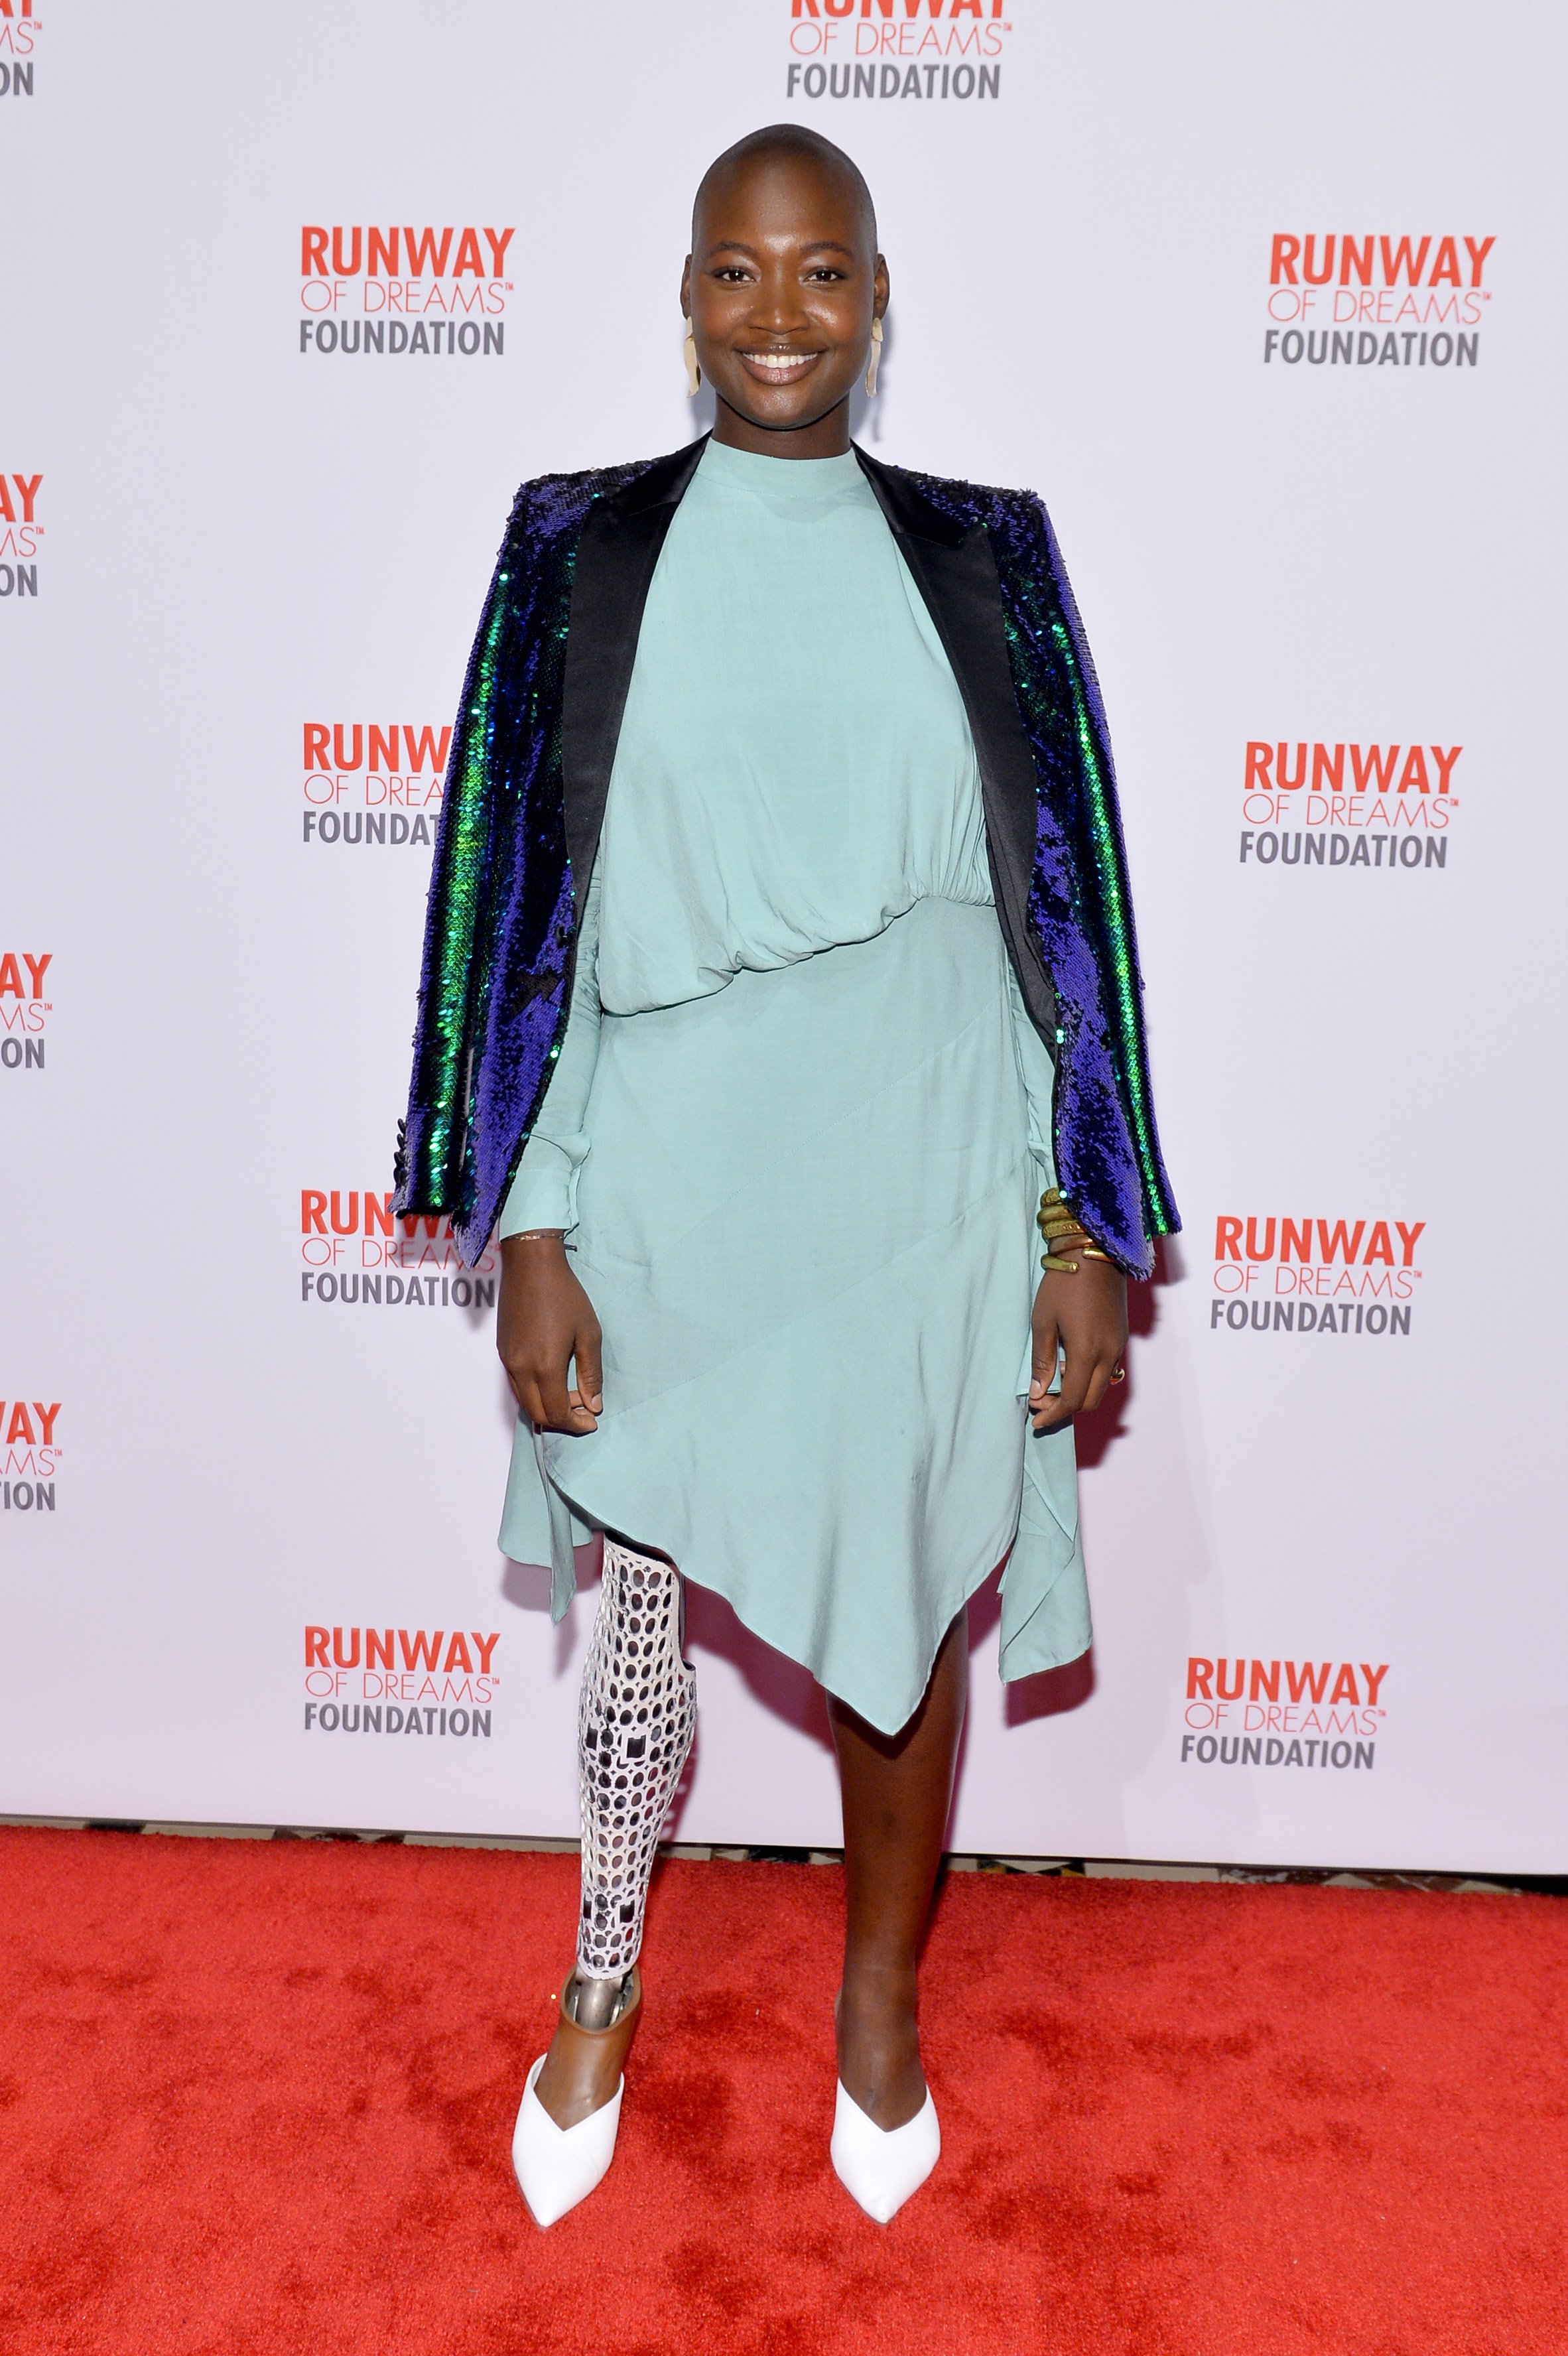 Mama Cax at the Runway Of Dreams Foundation Fashion Revolution Event at Cipriani 42nd Street, in New York City | Photo: Noam Galai/Getty Images for Runway Of Dreams Foundation